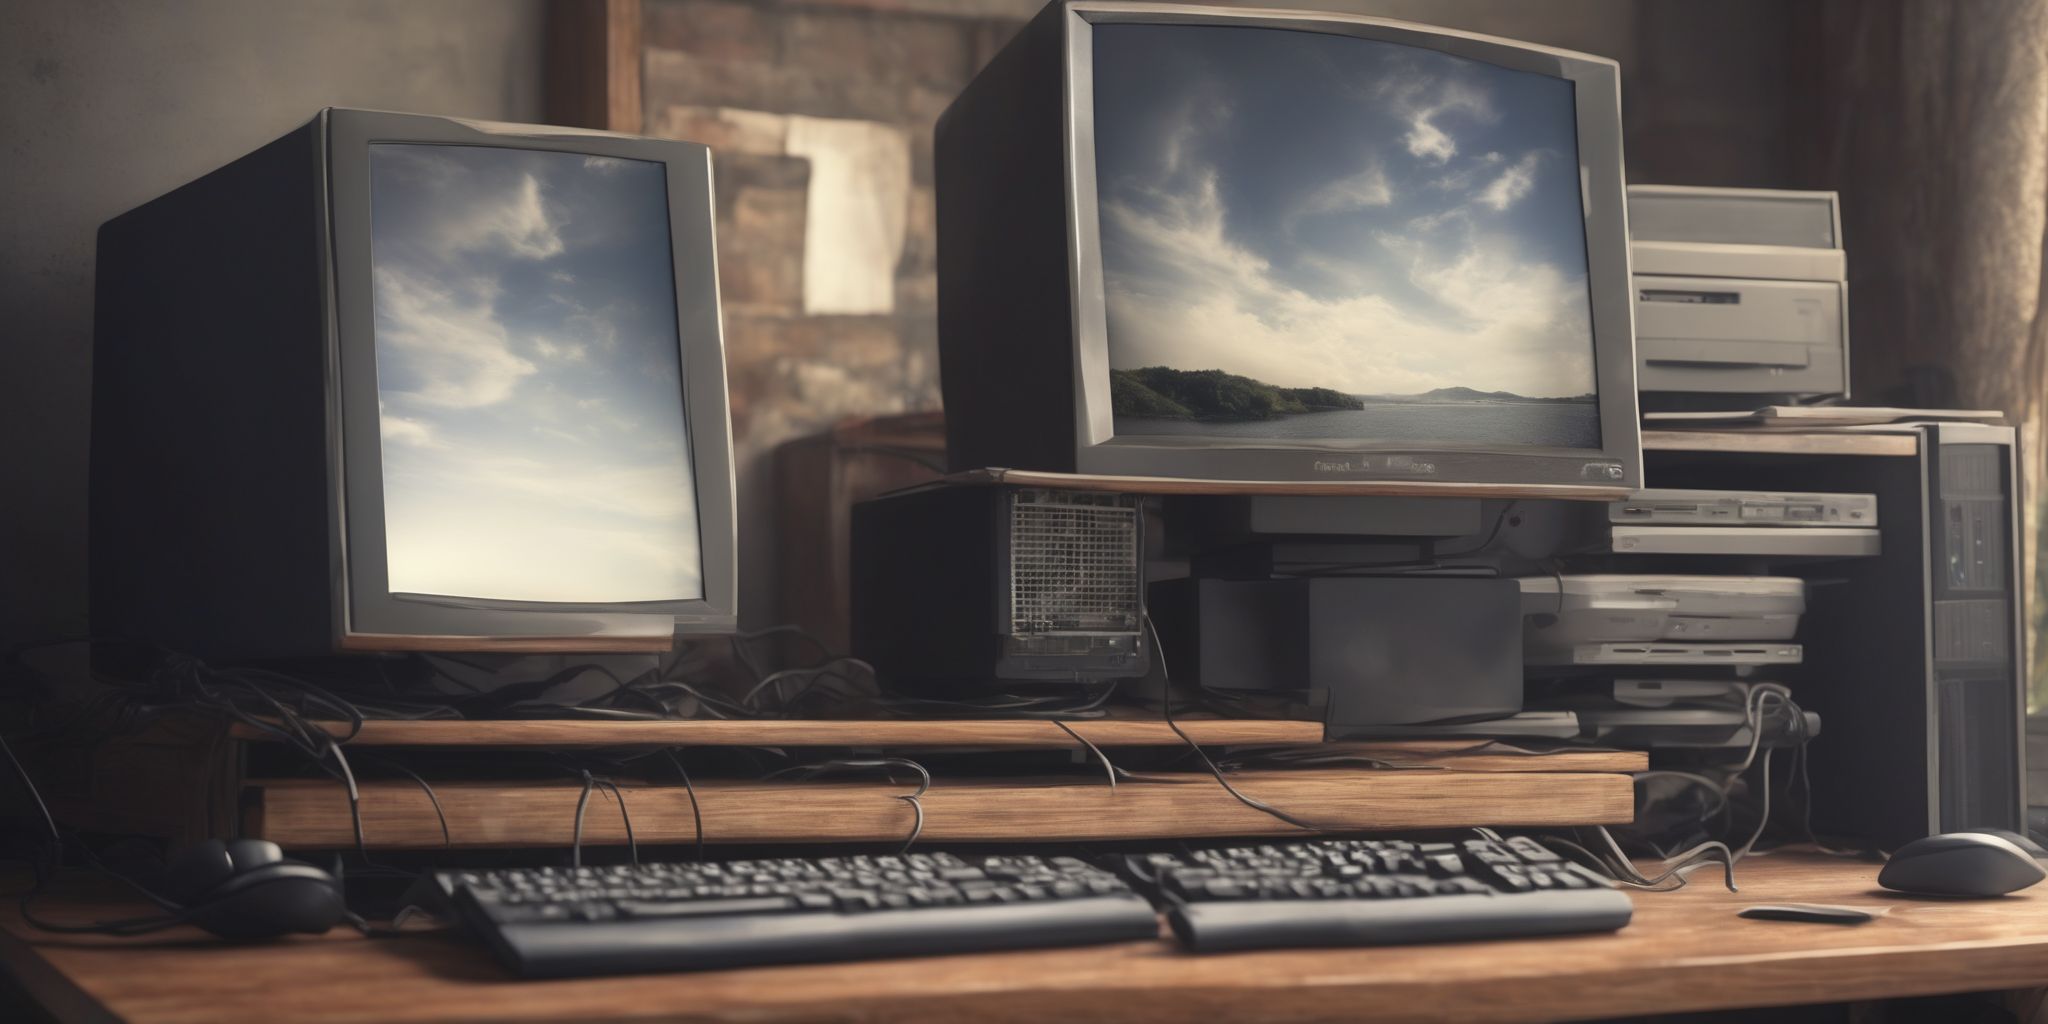 Computer  in realistic, photographic style